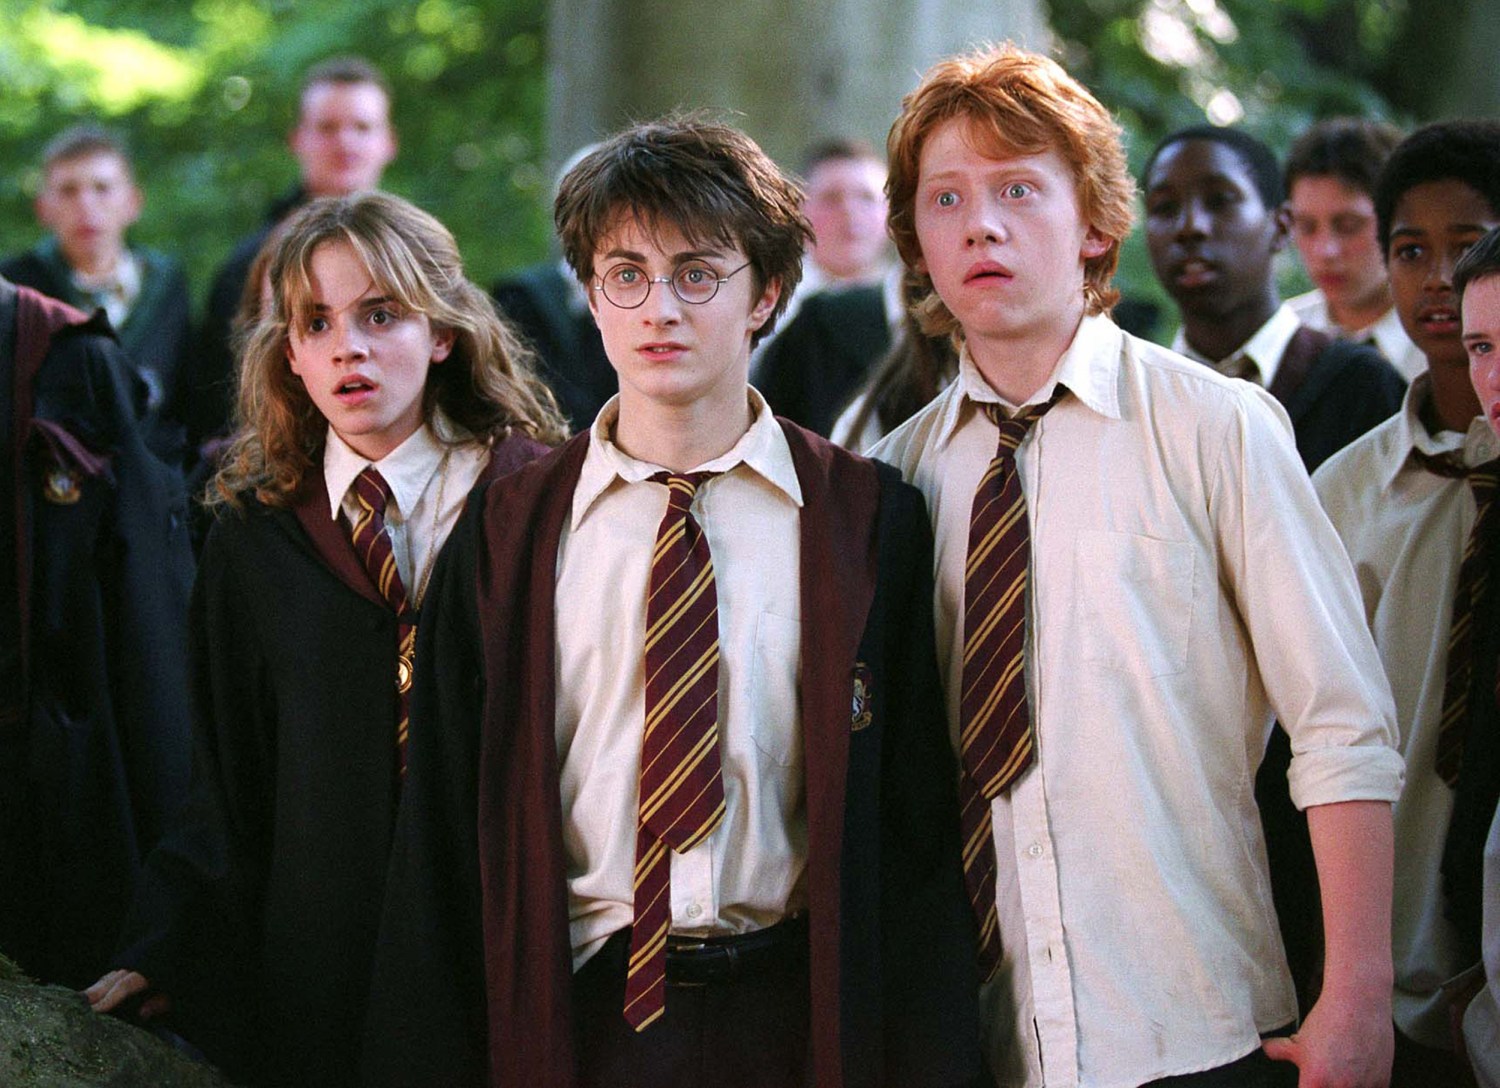 The Harry Potter Cast: A Global Phenomenon Beyond the Movies 2